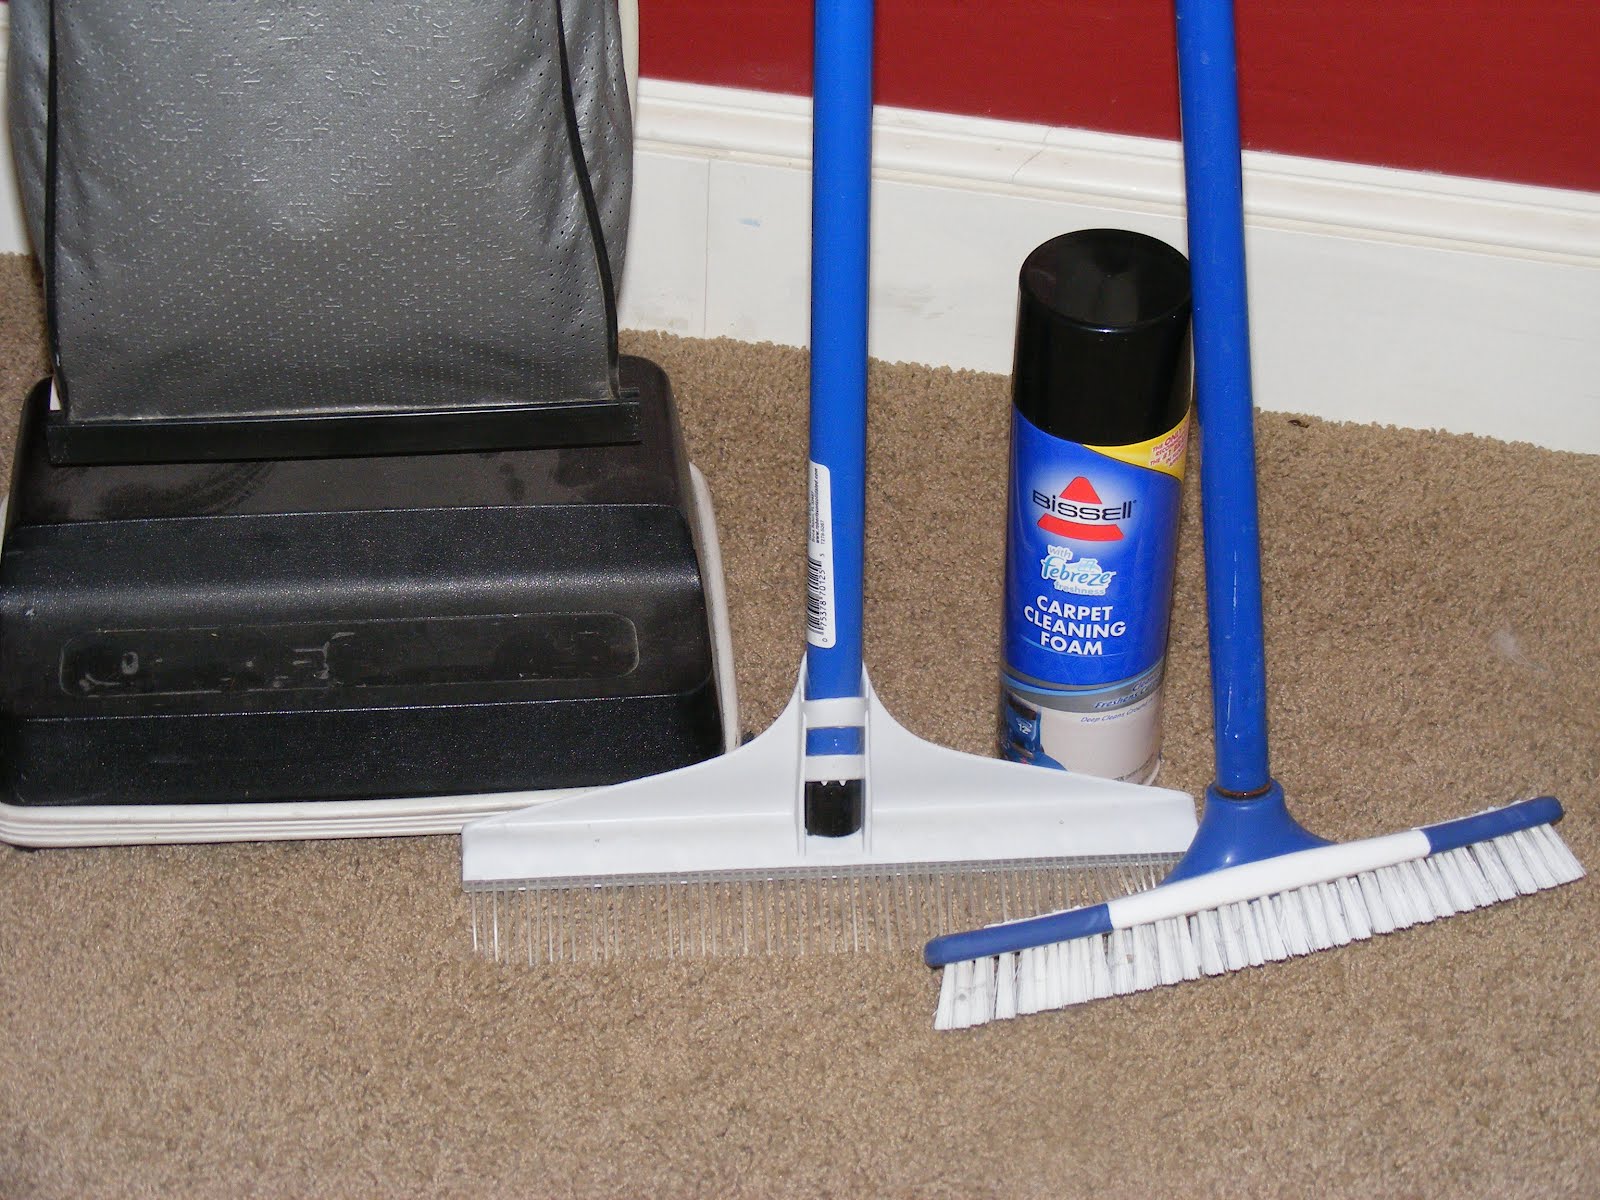 Cleaning Product for your Carpet